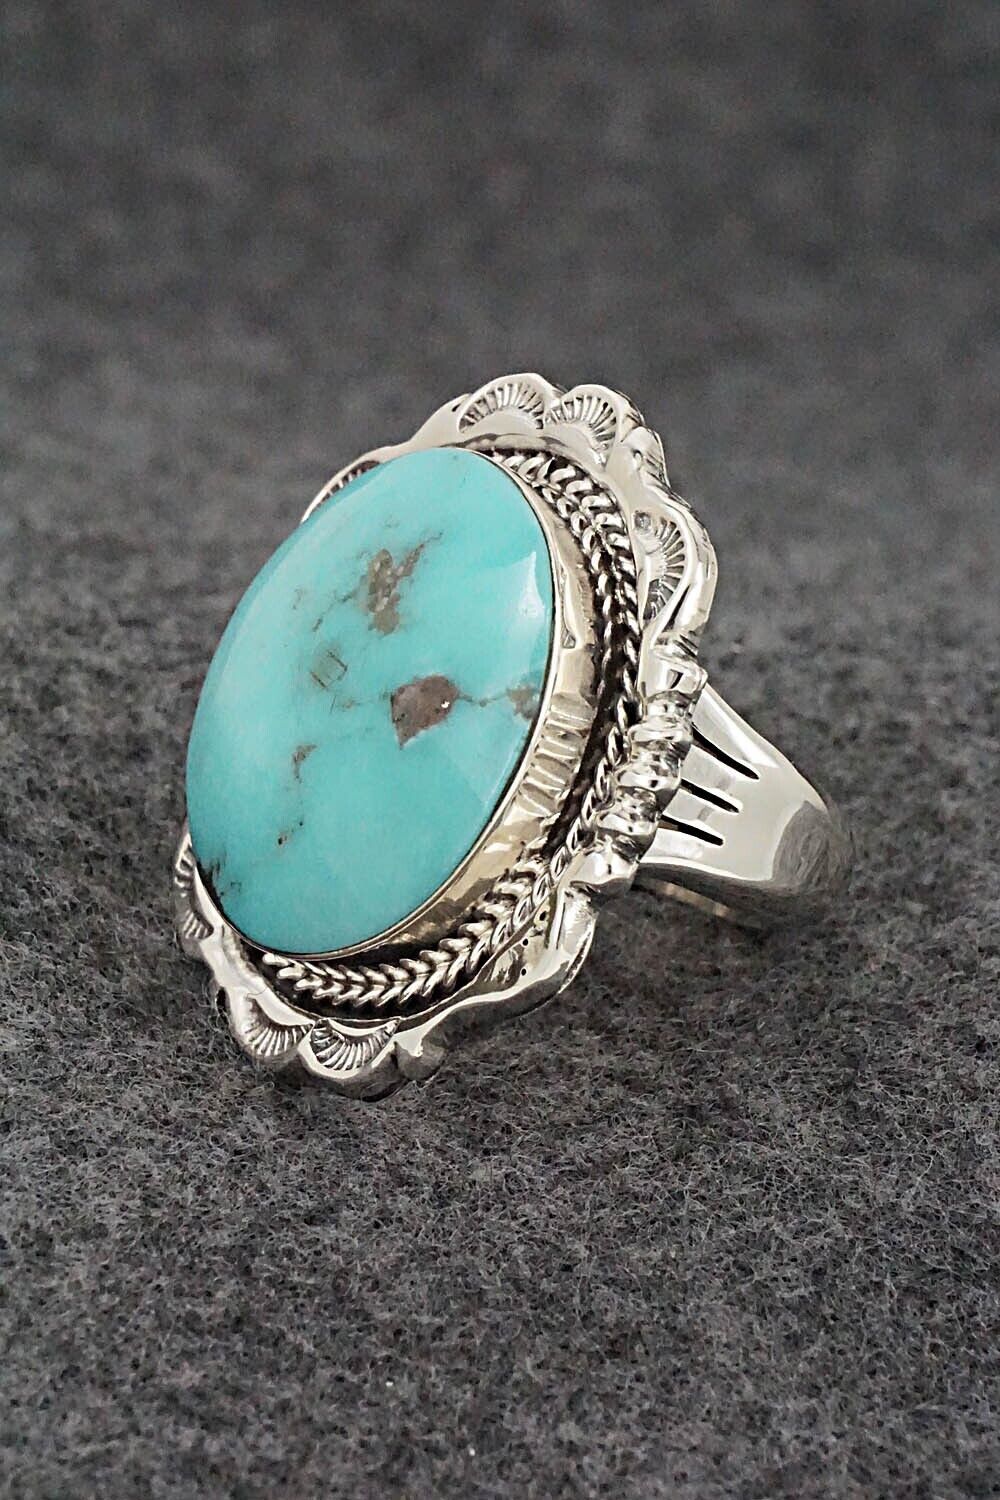 Turquoise & Sterling Silver Ring - Emerson Delgarito - Size 7.5